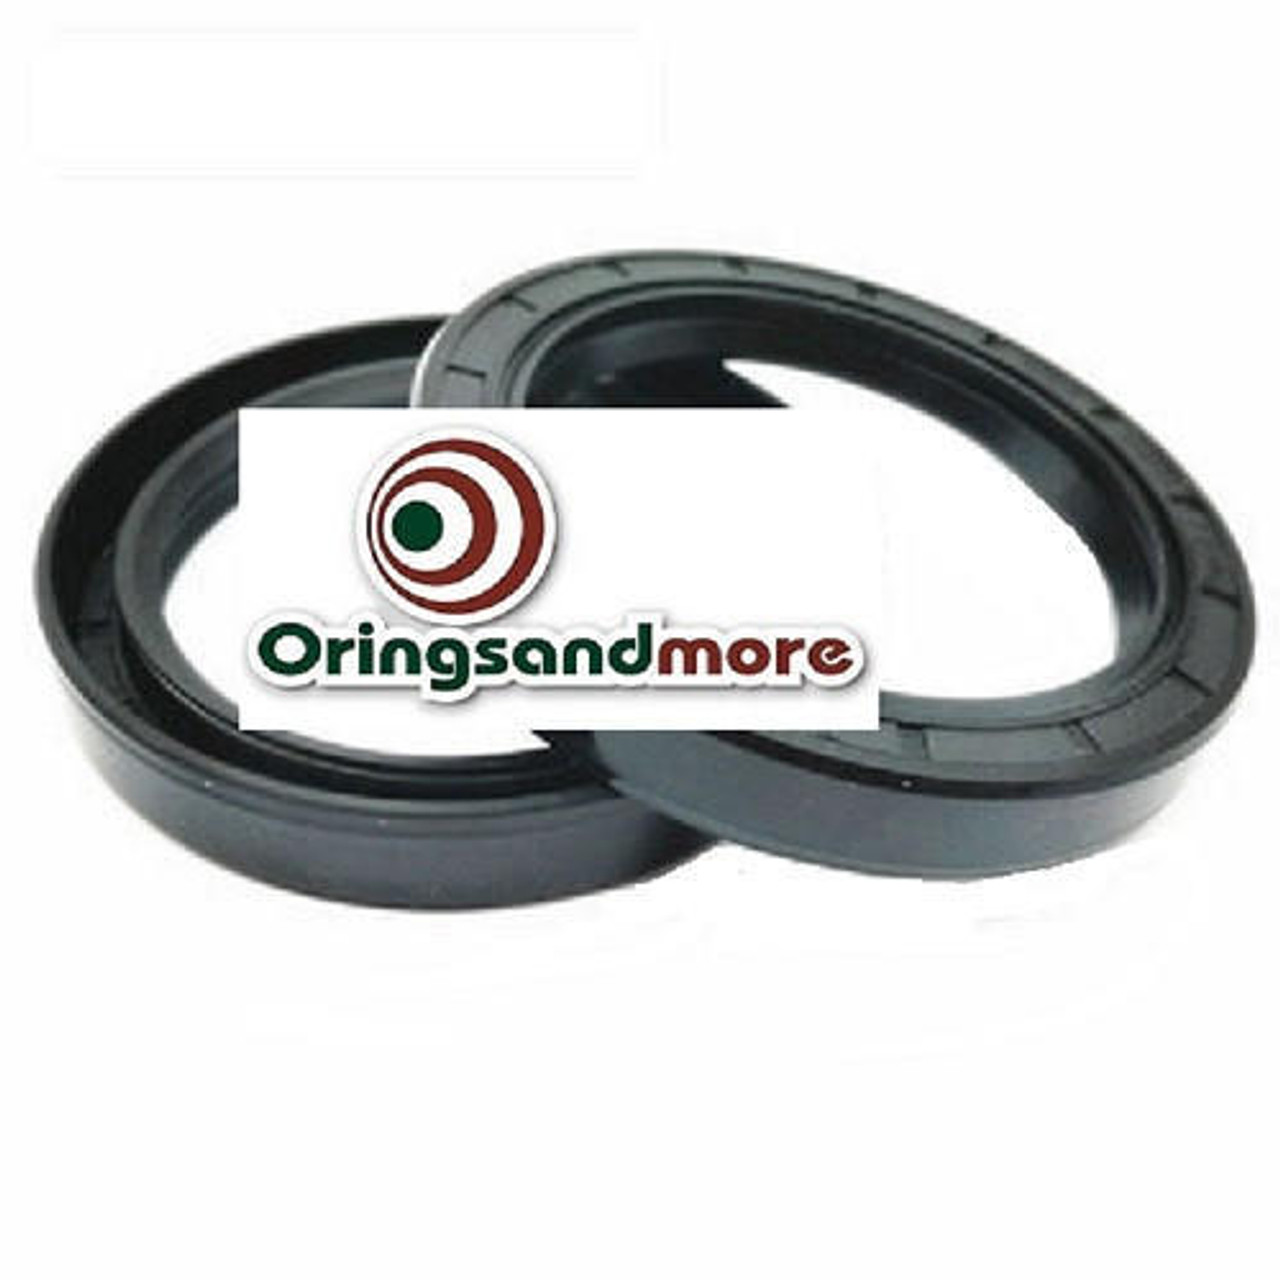 Metric Oil Shaft Seal 25 x 30 x 7mm Double Lip  Price for 1 pc